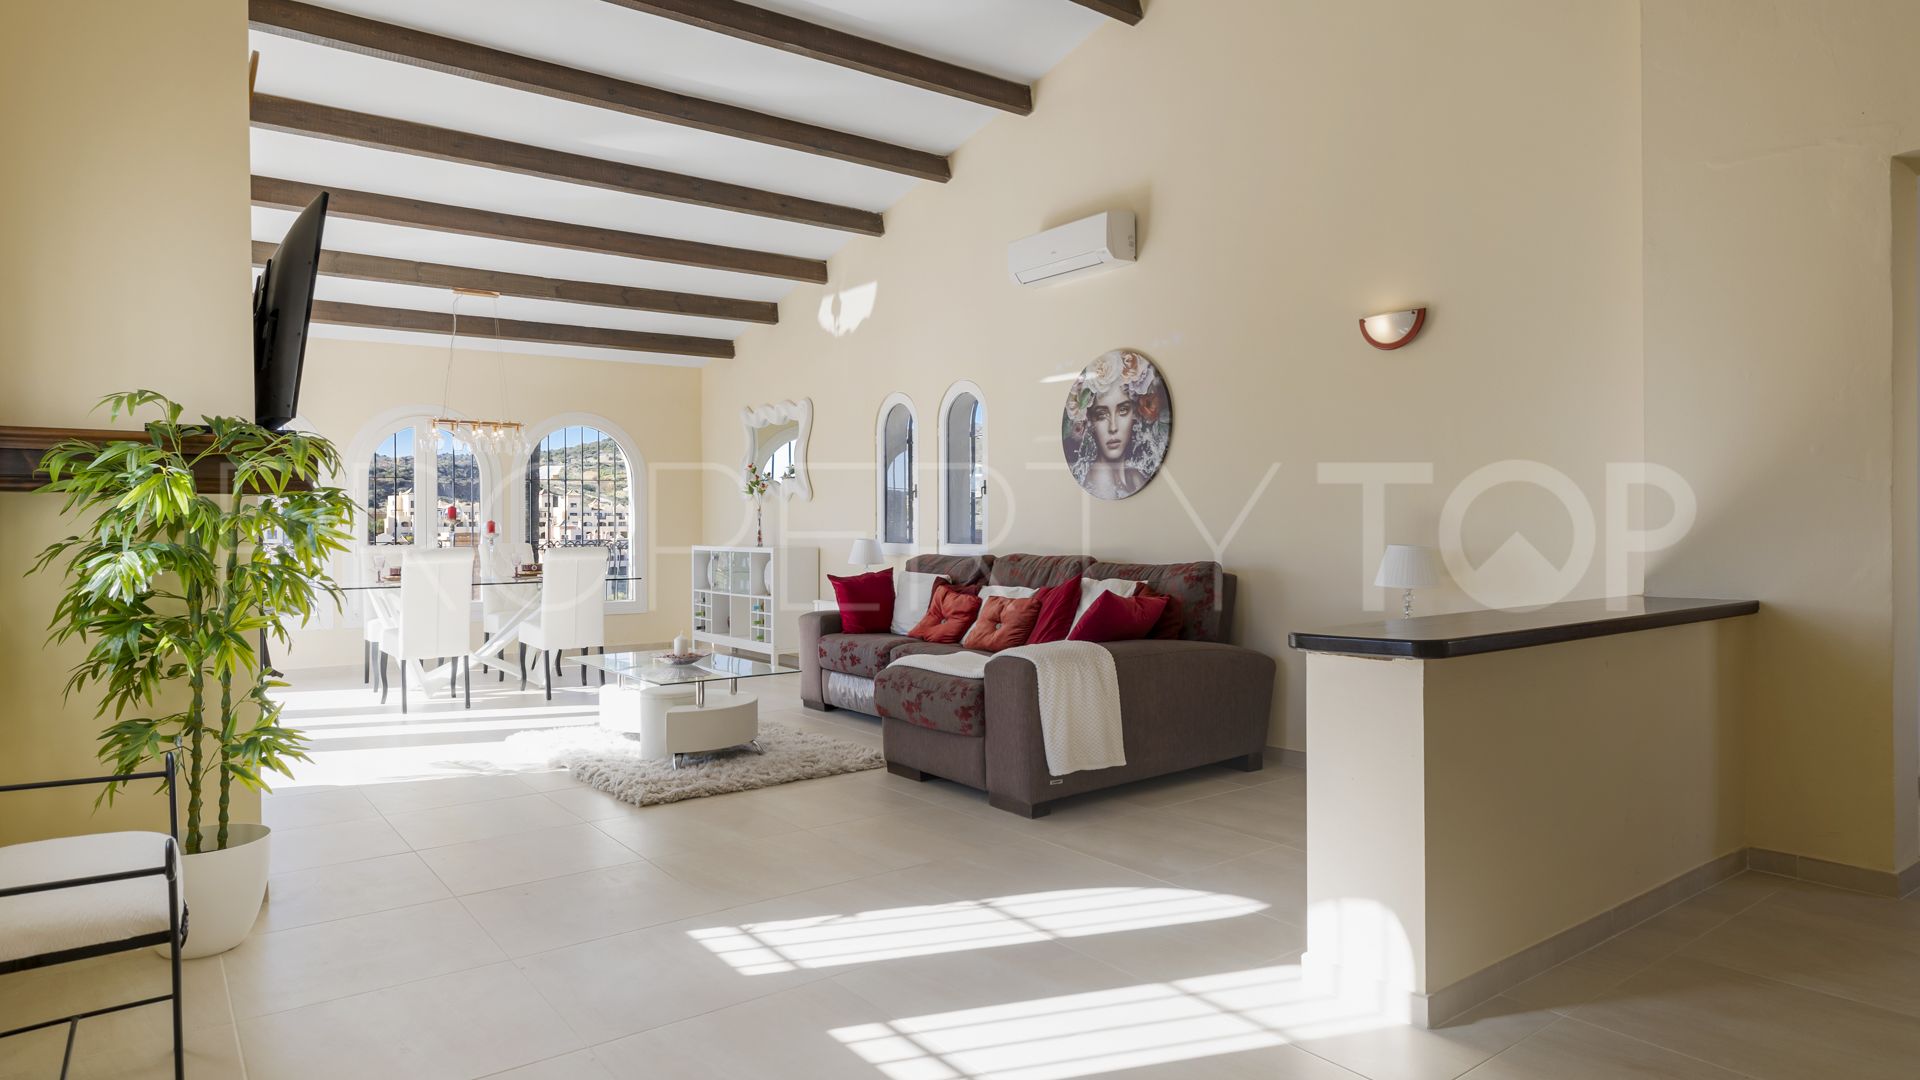 For sale villa in Valle Romano with 4 bedrooms